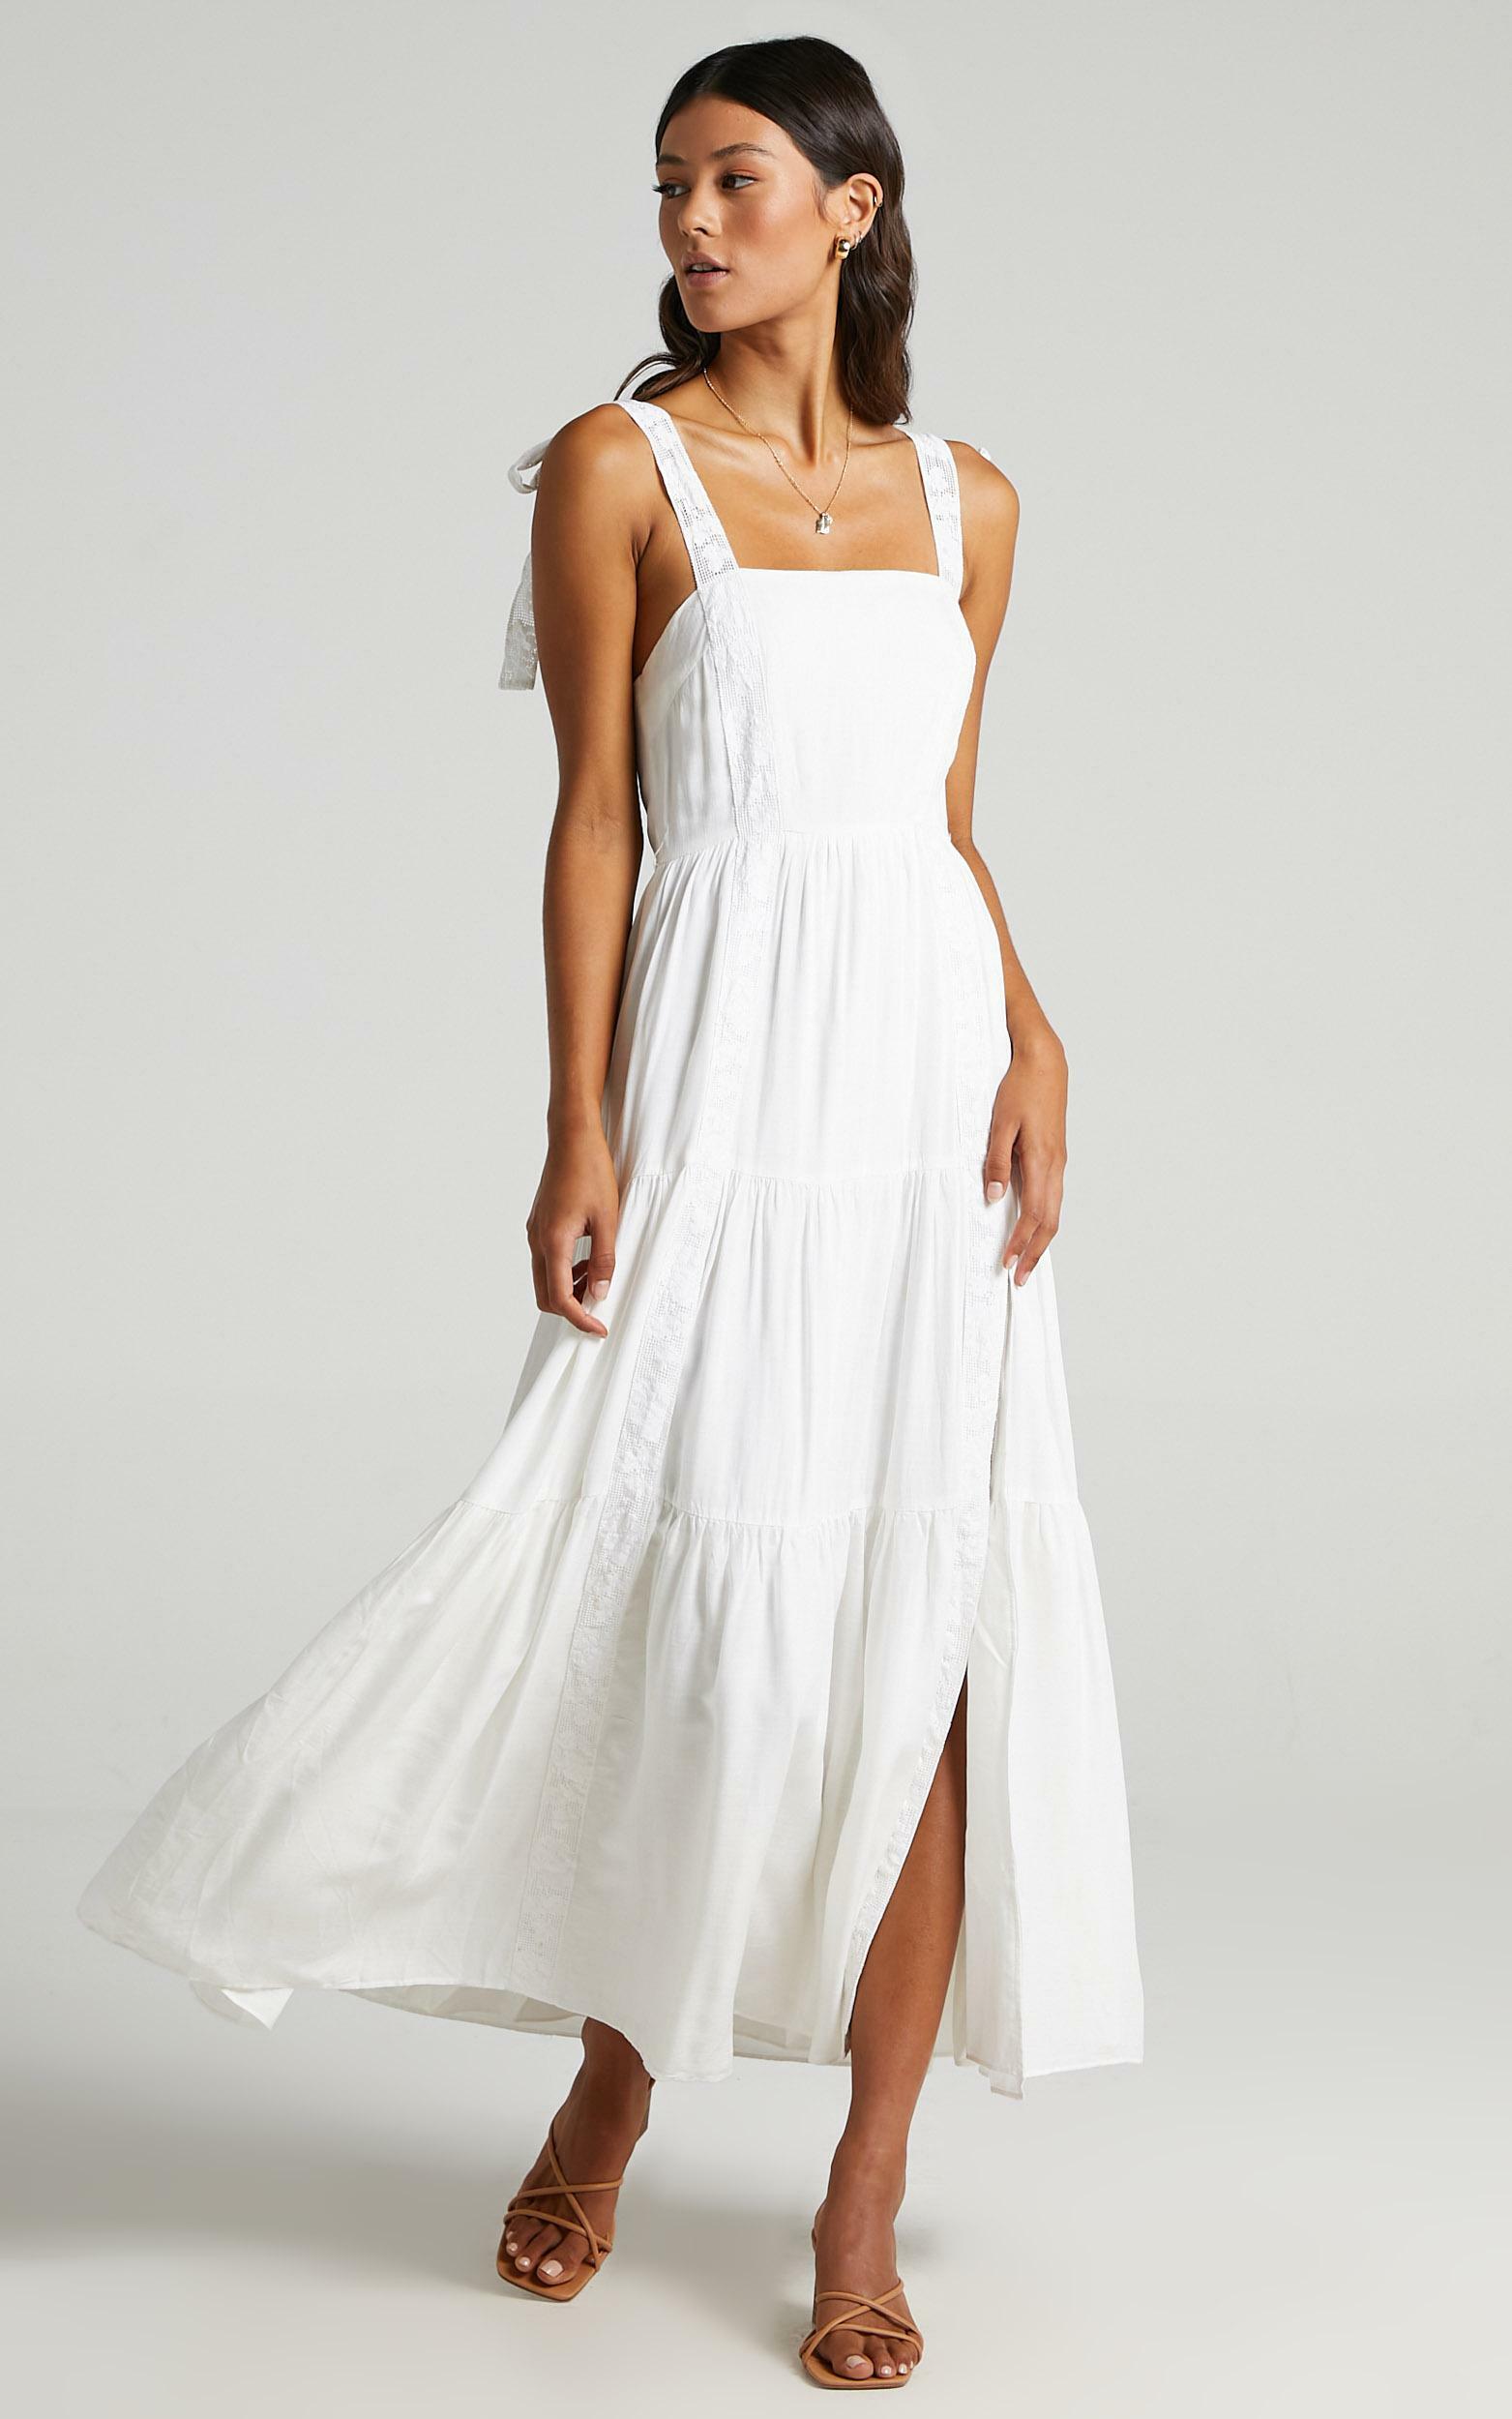 Afternoon Stroll Split Maxi Dress in White - 04, WHT2, hi-res image number null